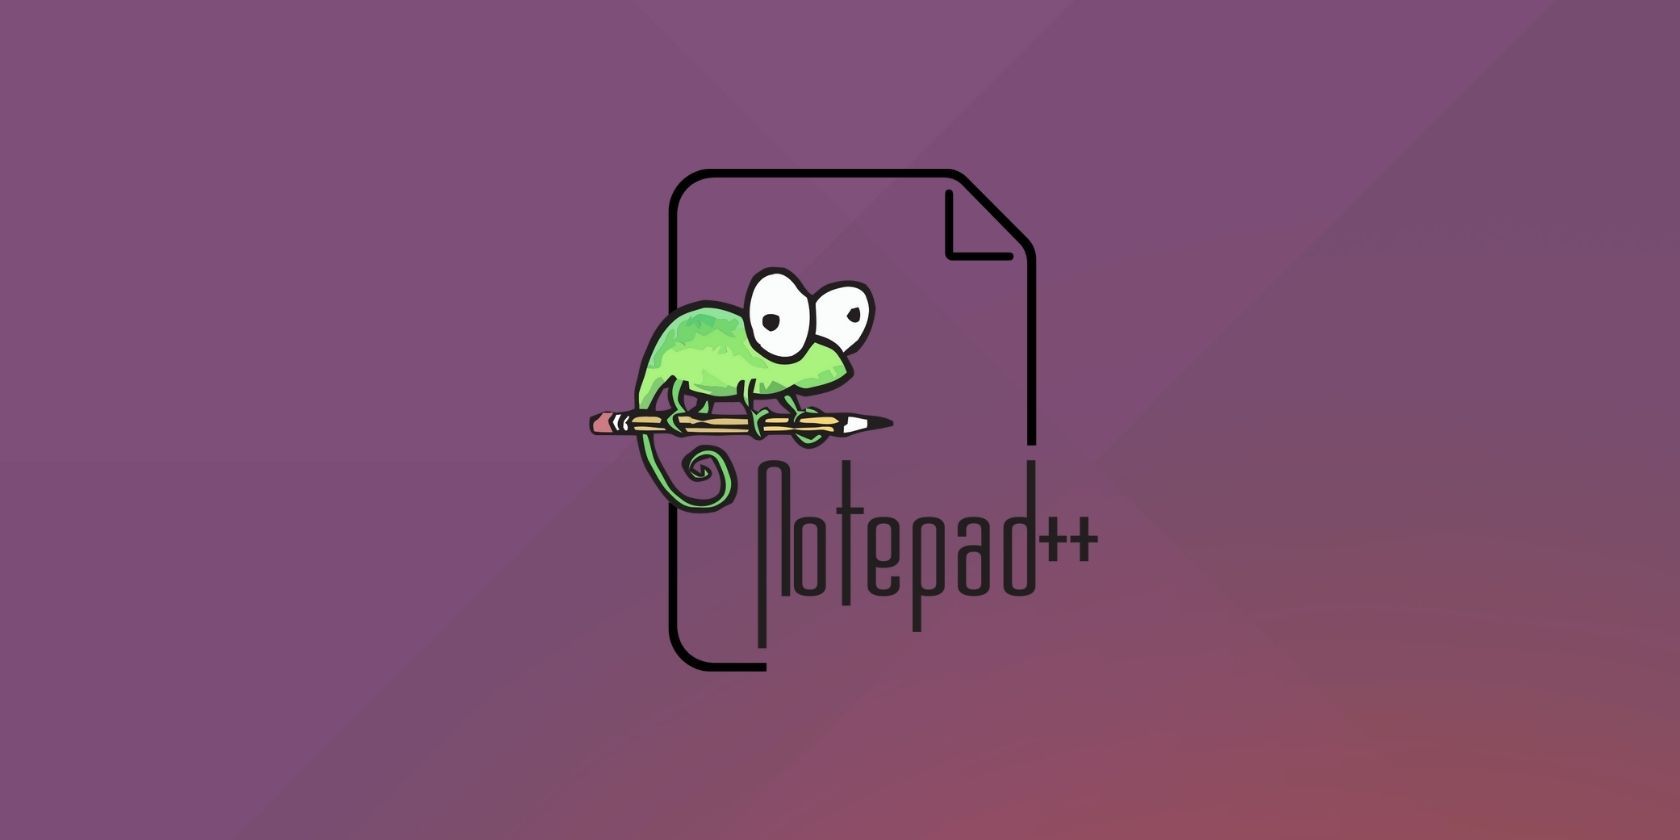 Notepad++ on Linux